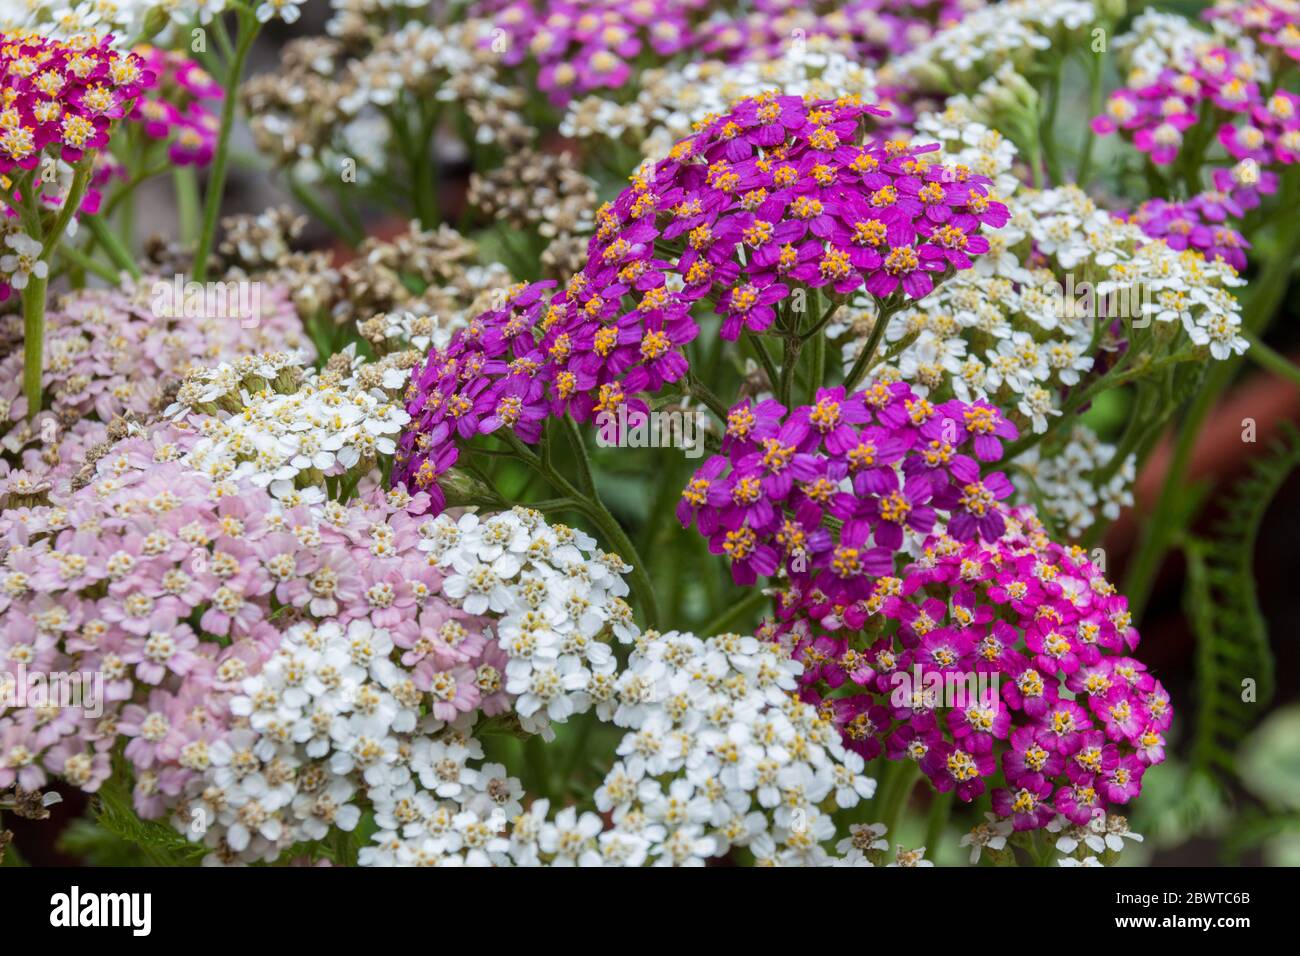 Blossoming yarrow flowers. Achillea millefolium, commonly known as yarrow or common yarrow, is a flowering plant in the family Asteraceae. Stock Photo